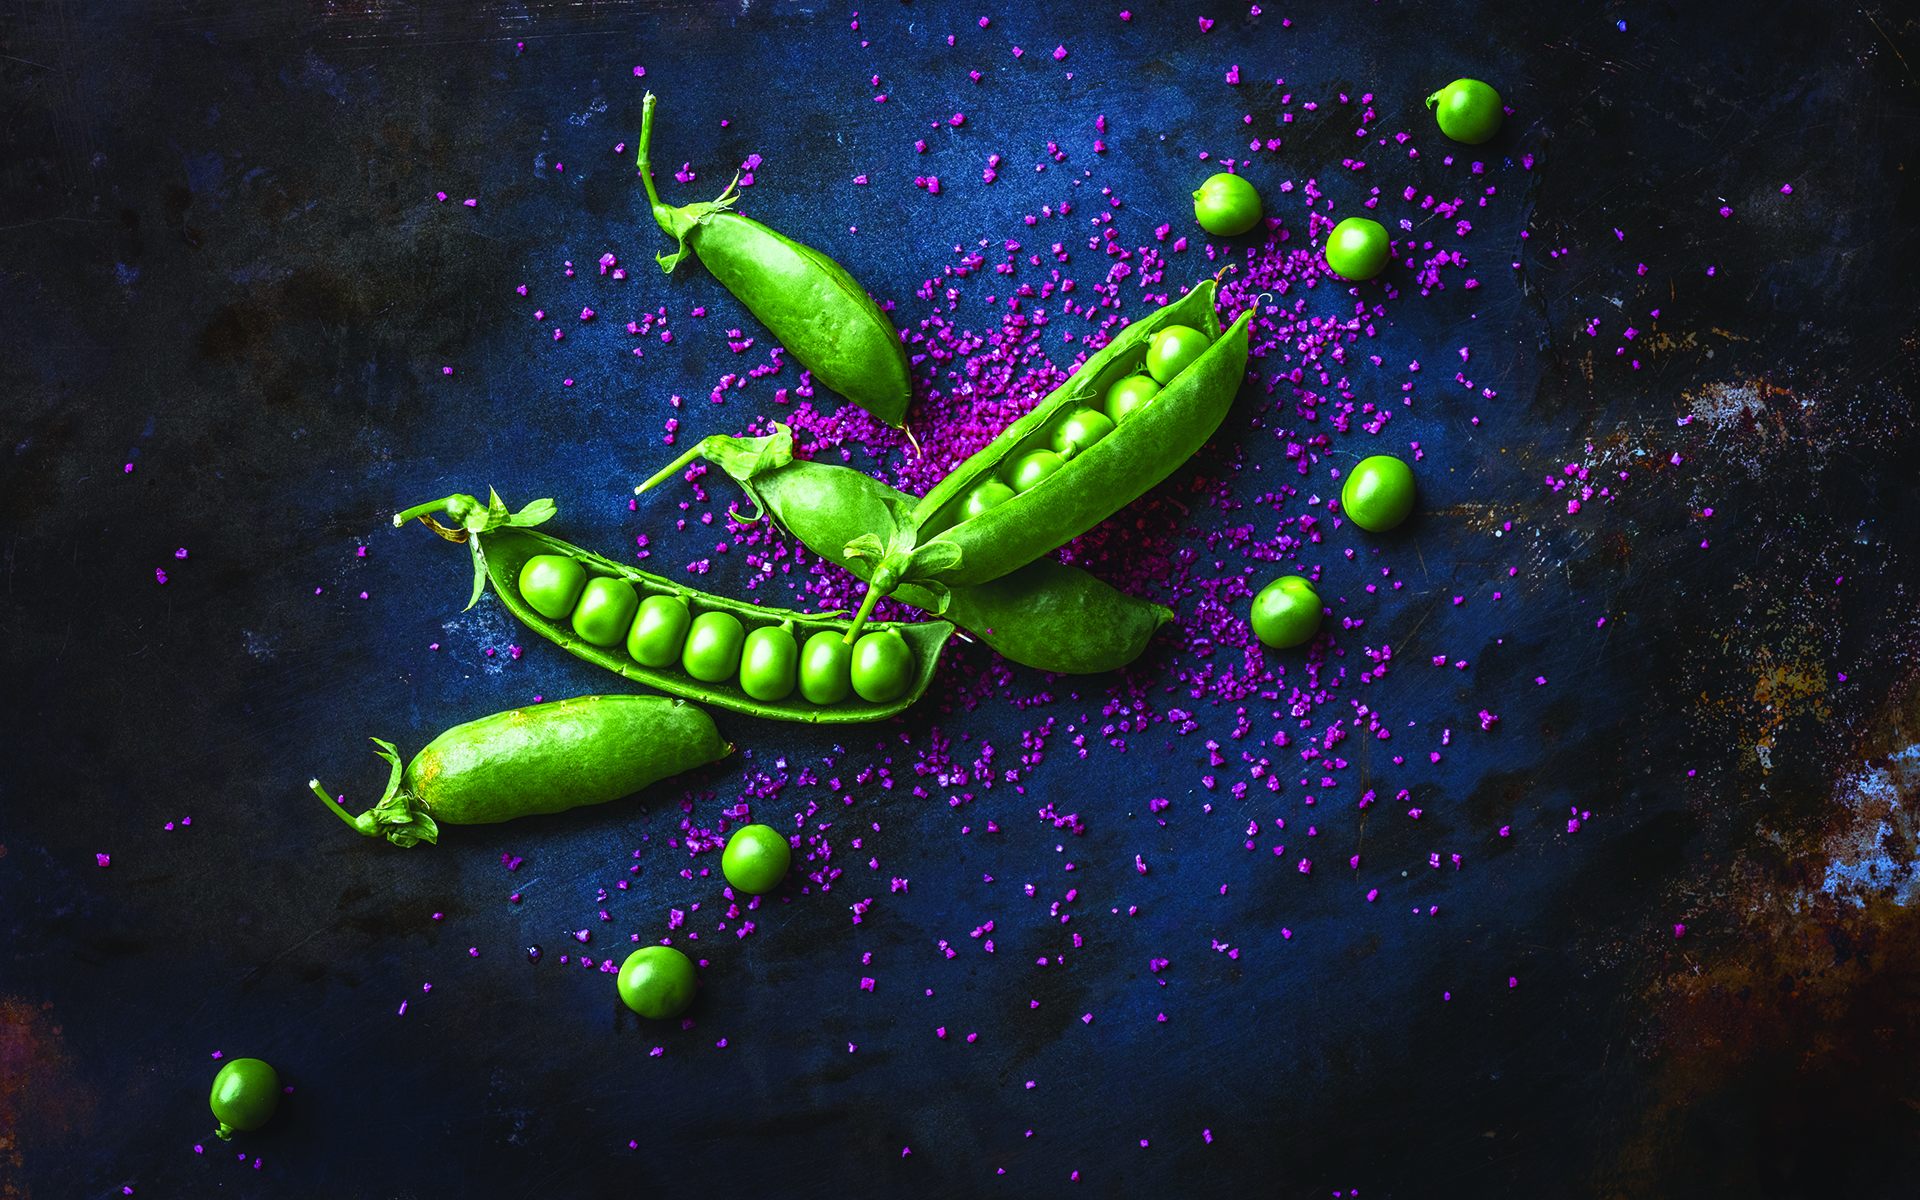 Photograph of peas in pods on dark blue background and pink powder.